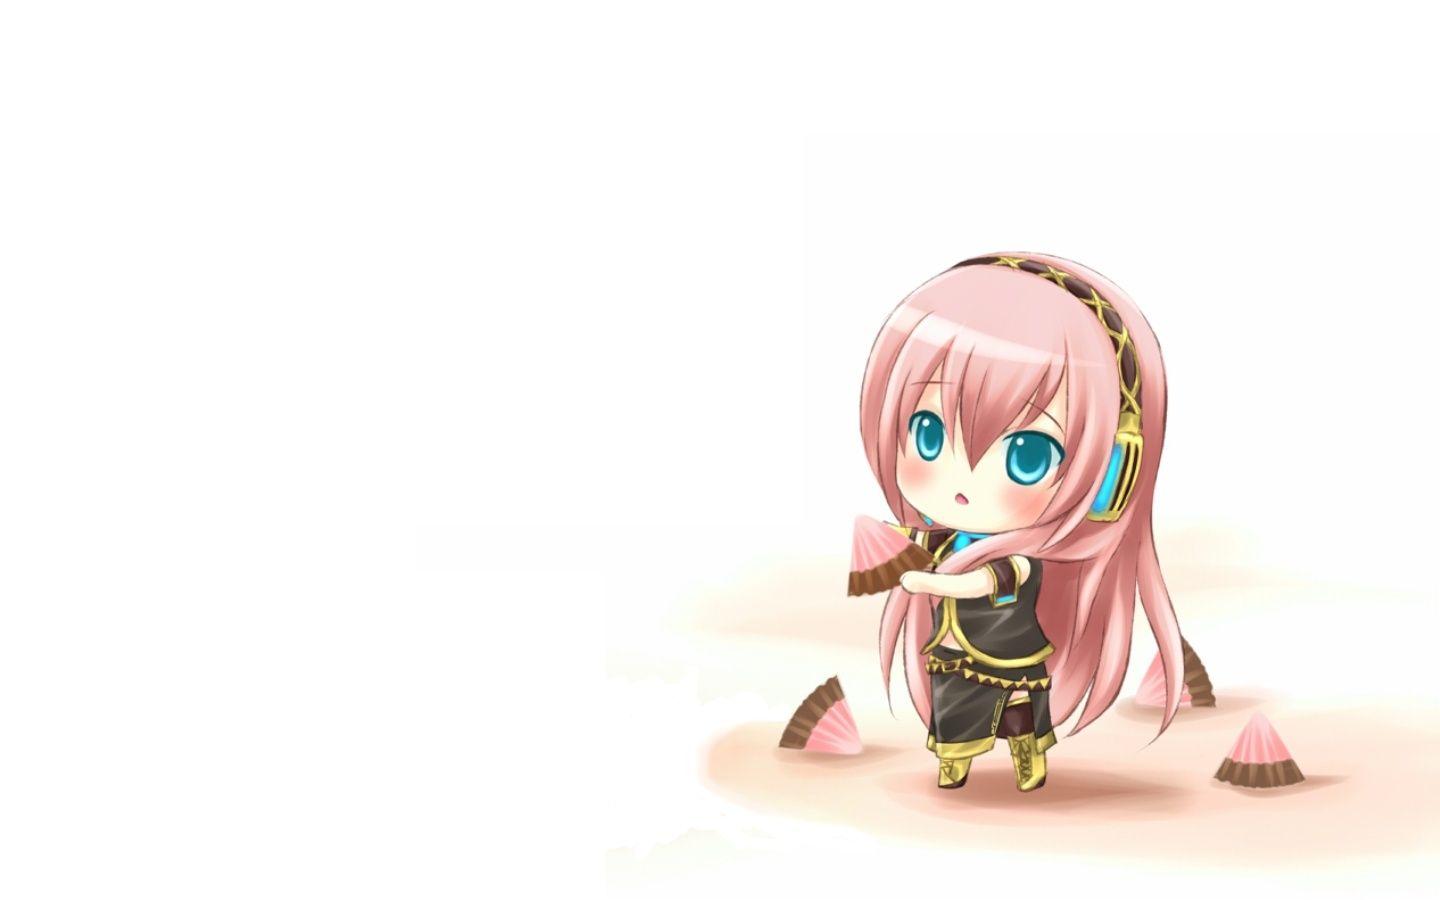 Anime Chibi Vocaloid Cool Wallpaper. I HD Image